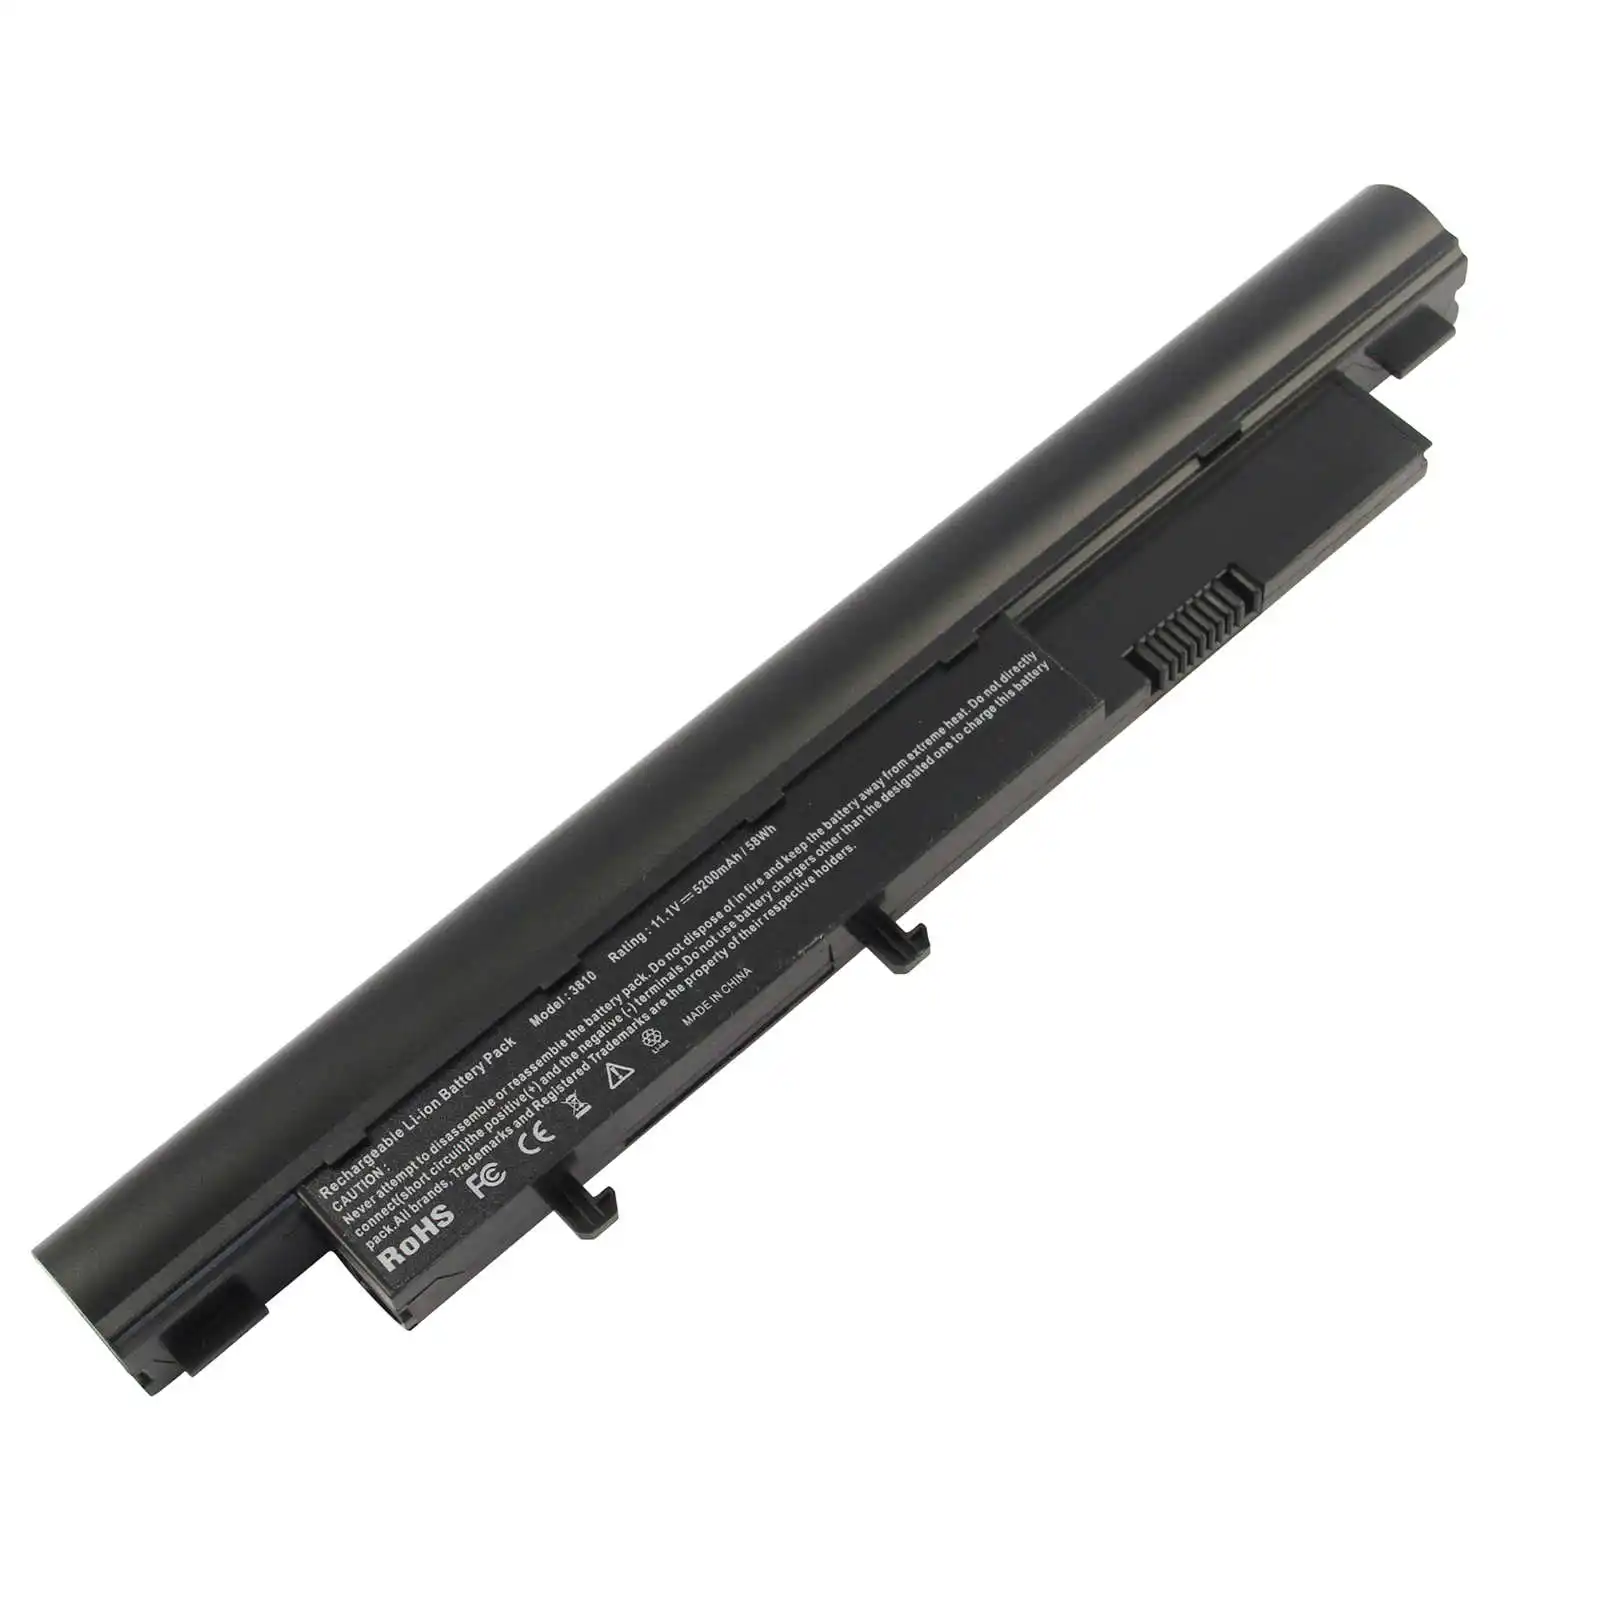 Hot sale Notebook Battery for Acer 3810 3810T 5810 5810T TM8371 AS09D36 AS09D71